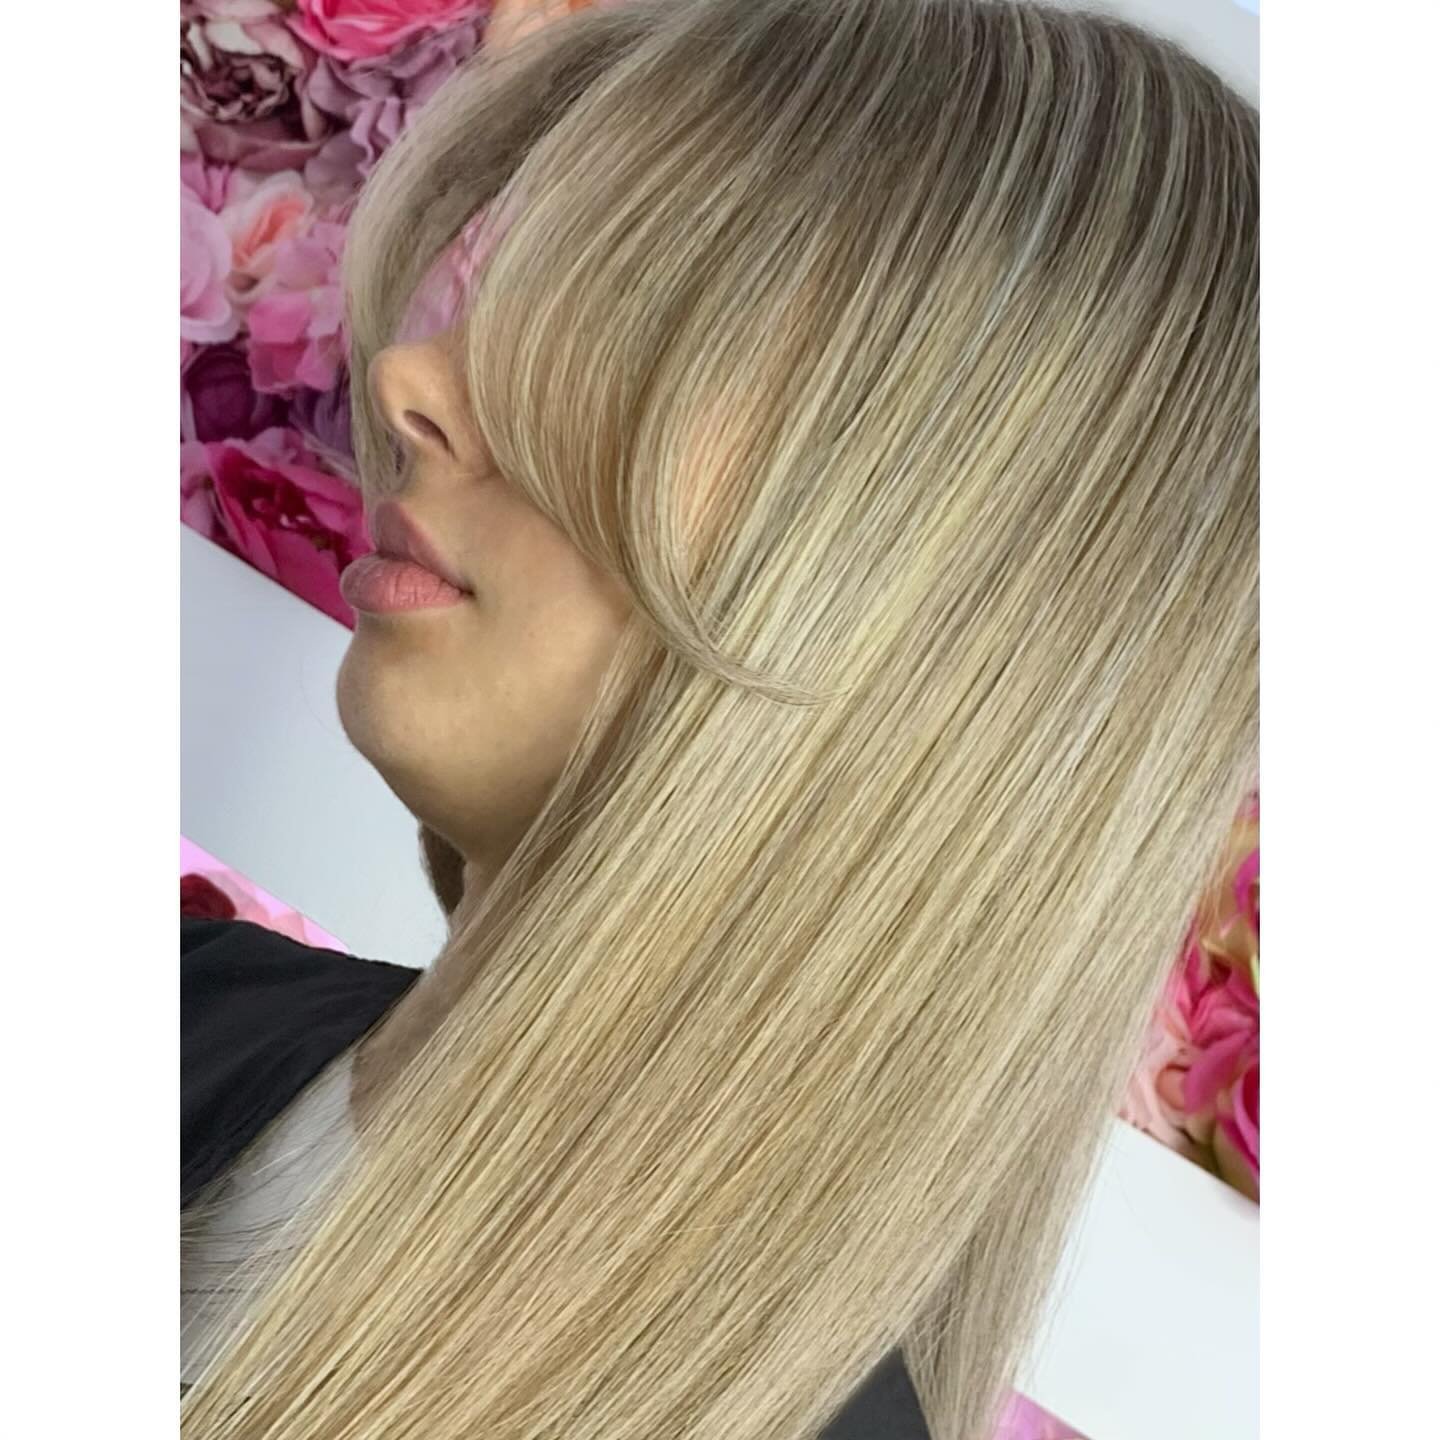 | C u r t a i n  G l o w | From a head of tired, grown-out brassy locks delicately woven into a seamless sheet of multi-tonal highlights to give this sandy blonde take a natural, bright glow ♡︎

Hair by Steph 

SWIPE &lt; across for more &lt; IMAGES 